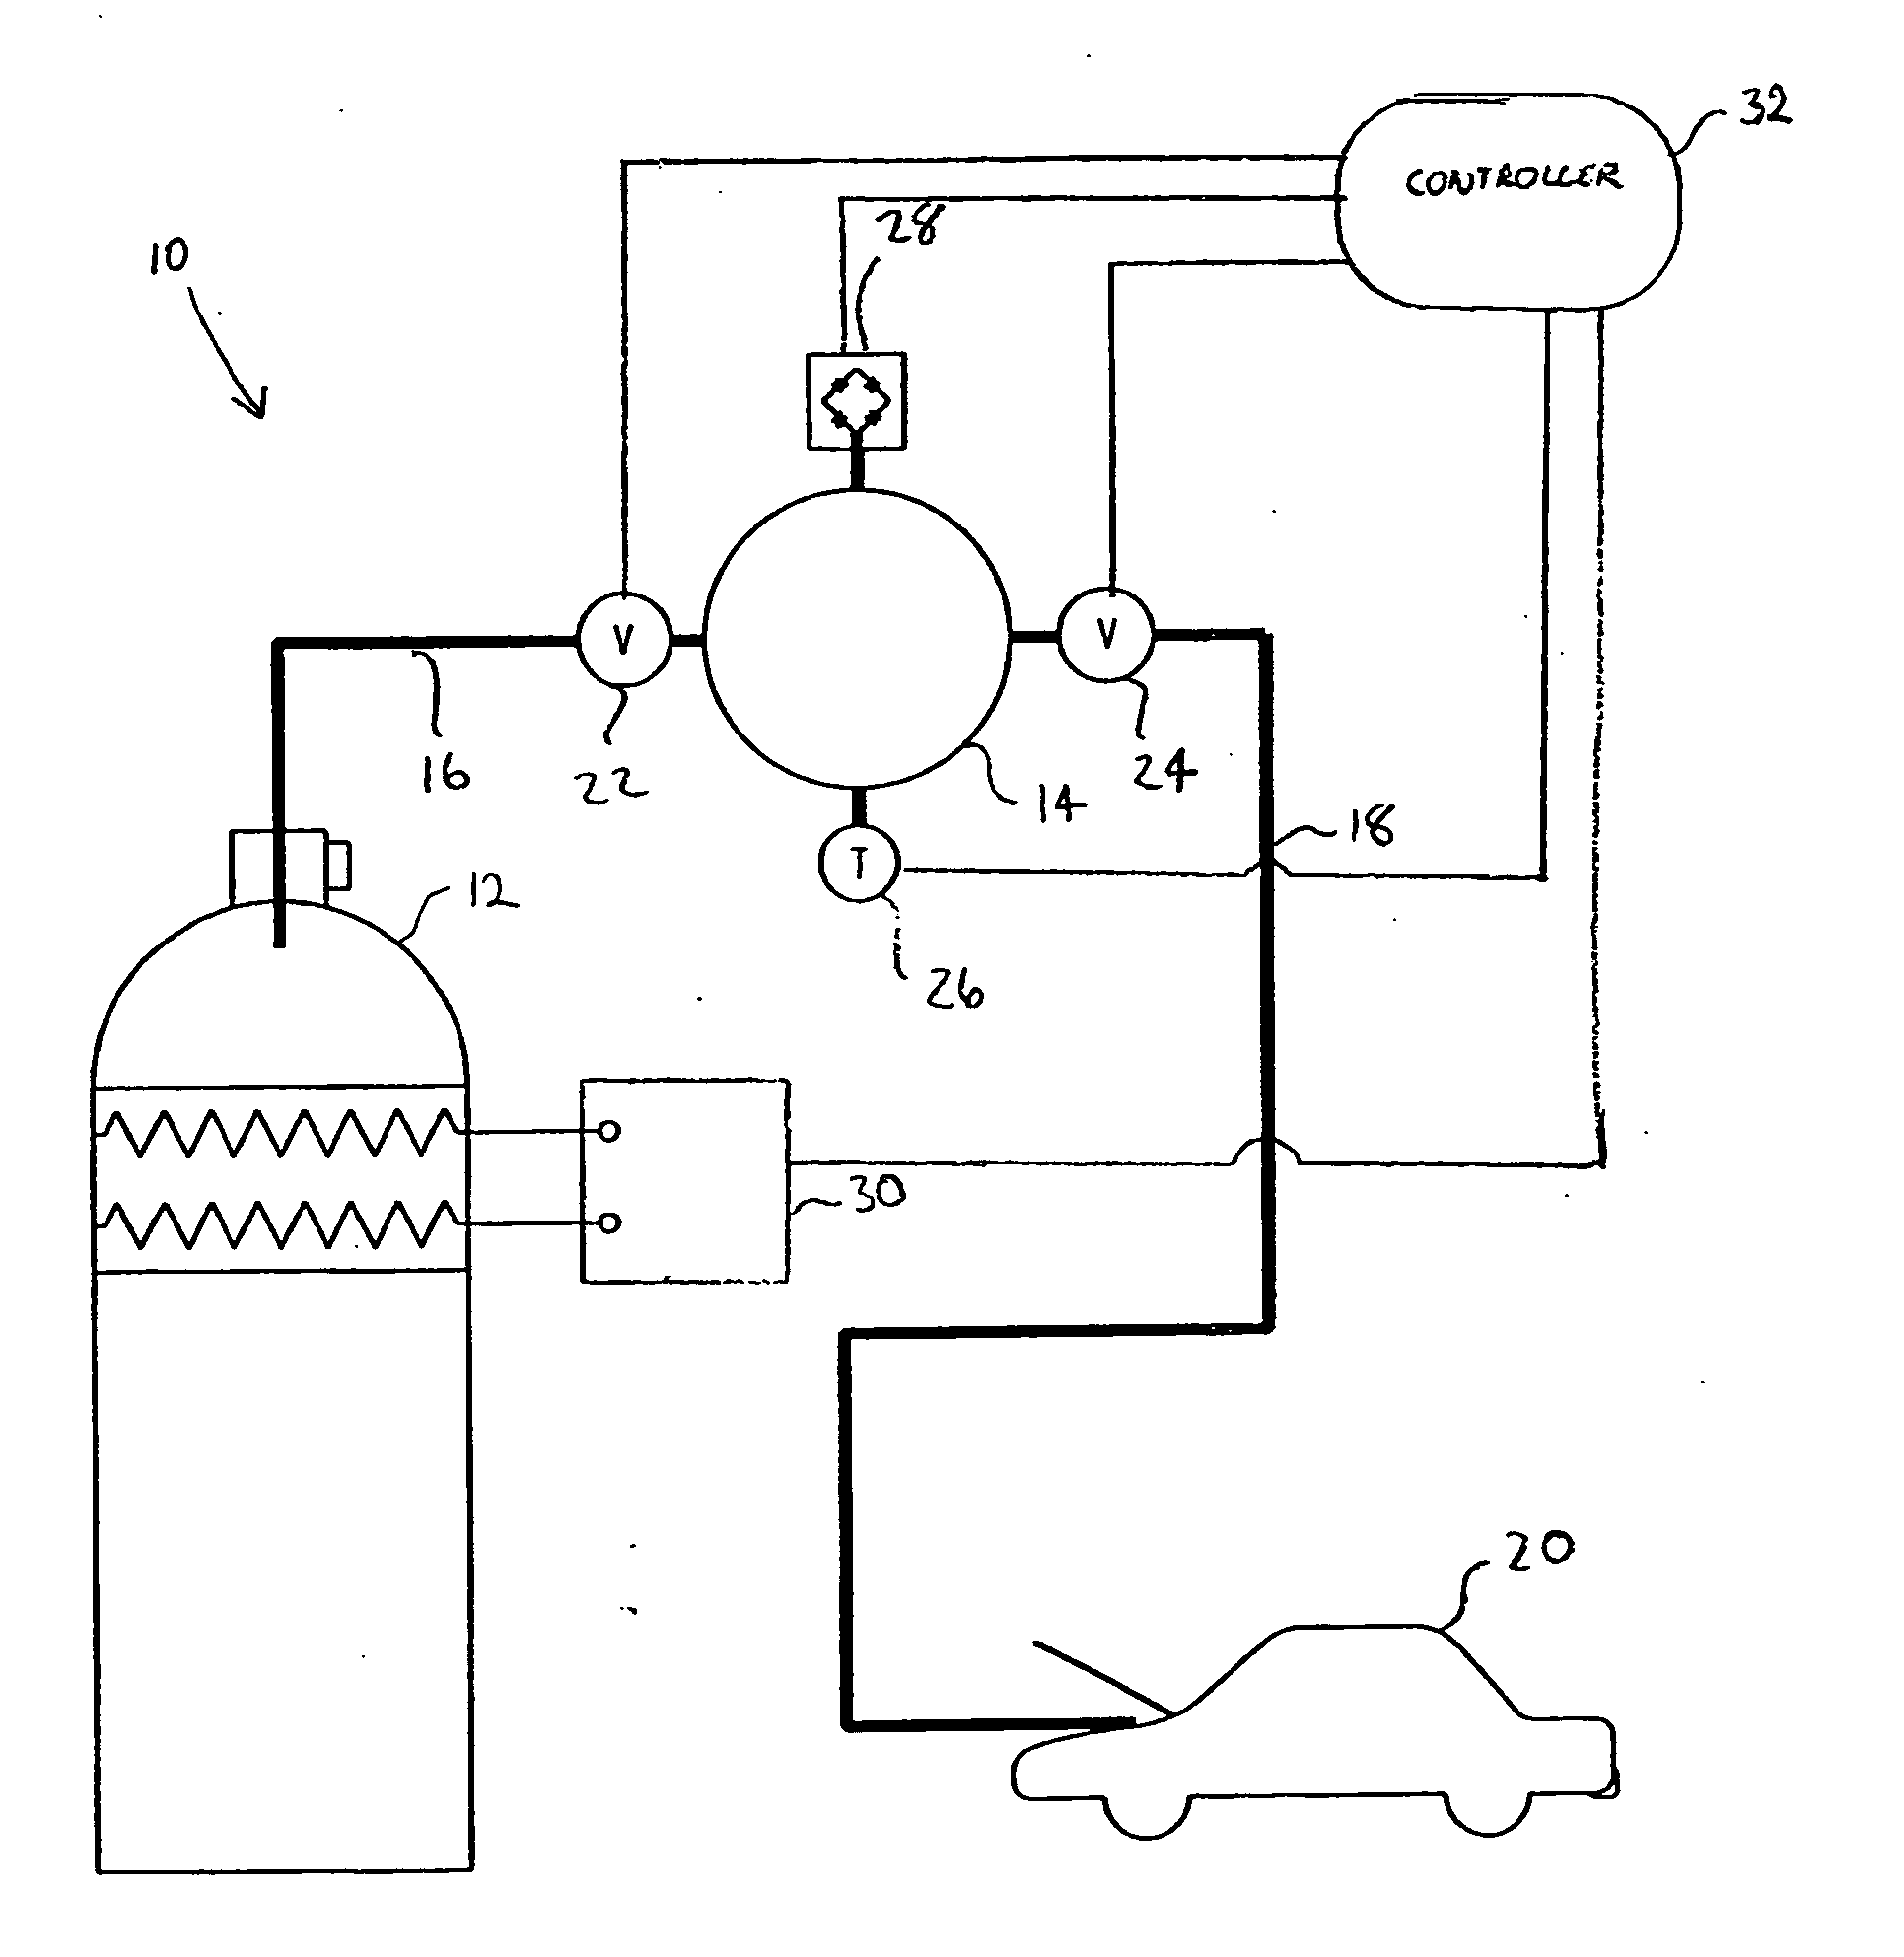 System for refrigerant charging with constant volume tank